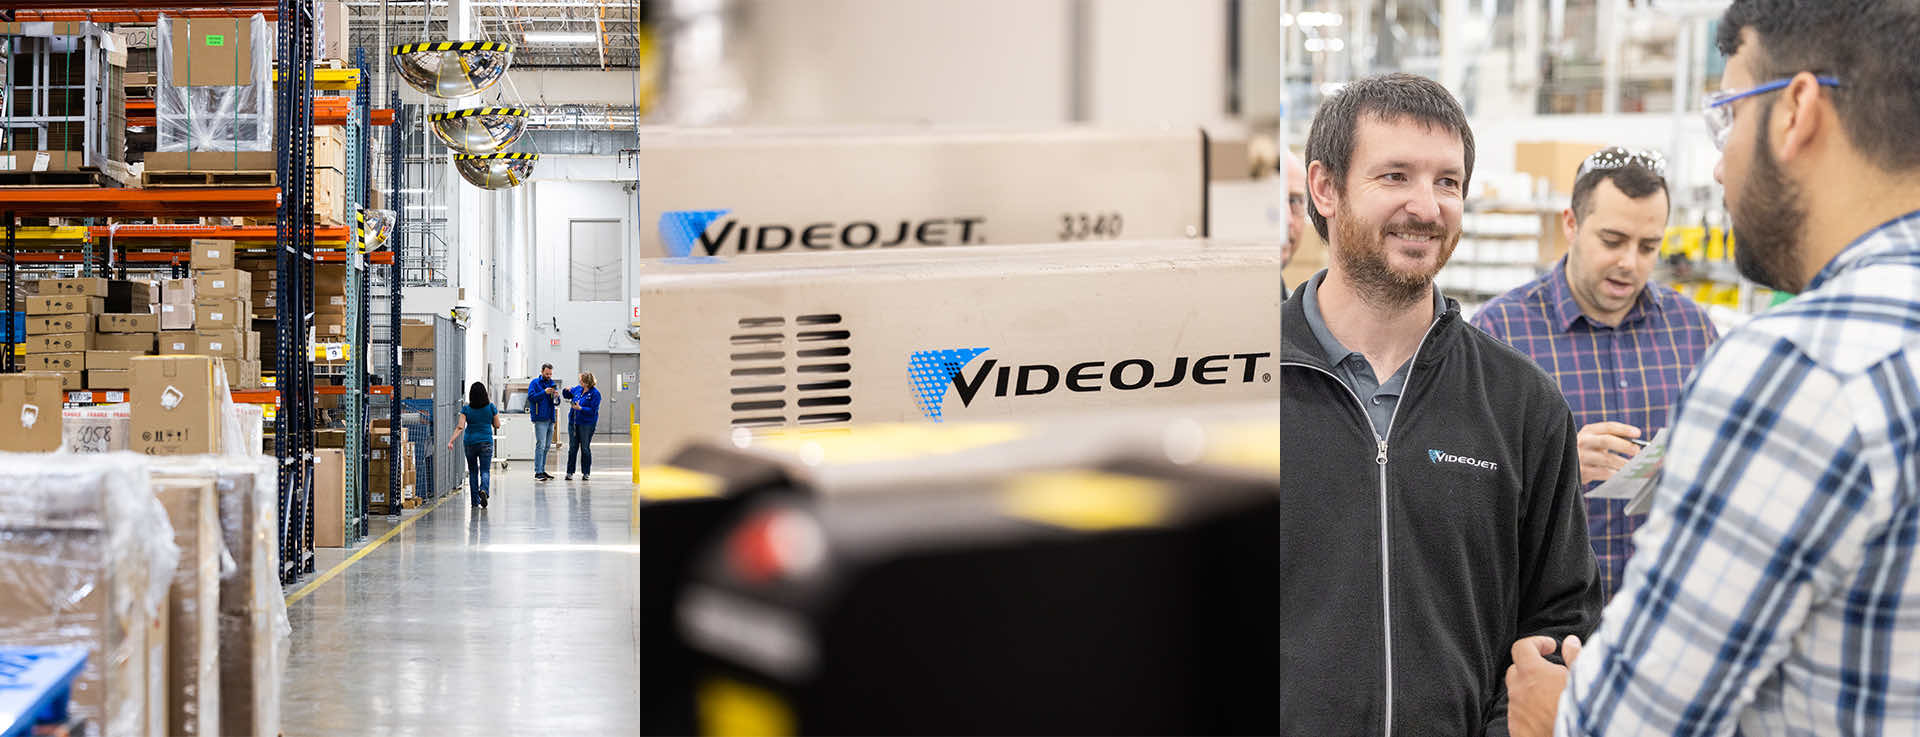 Triptych view of Videojet Wood Dale factory, close-up view of Videojet products, Videojet Associates on manufacturing floor